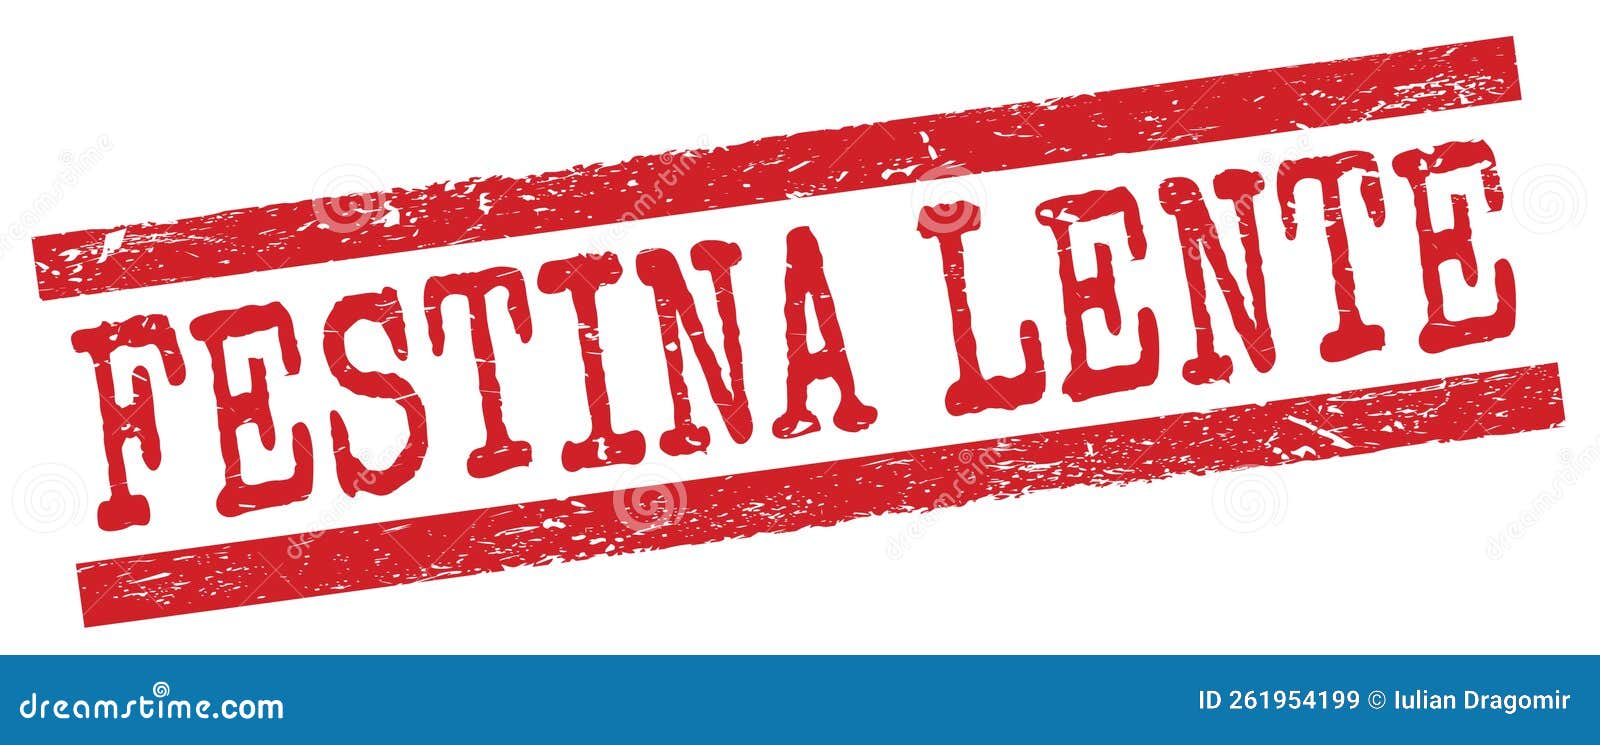 festina lente text on red lines stamp sign